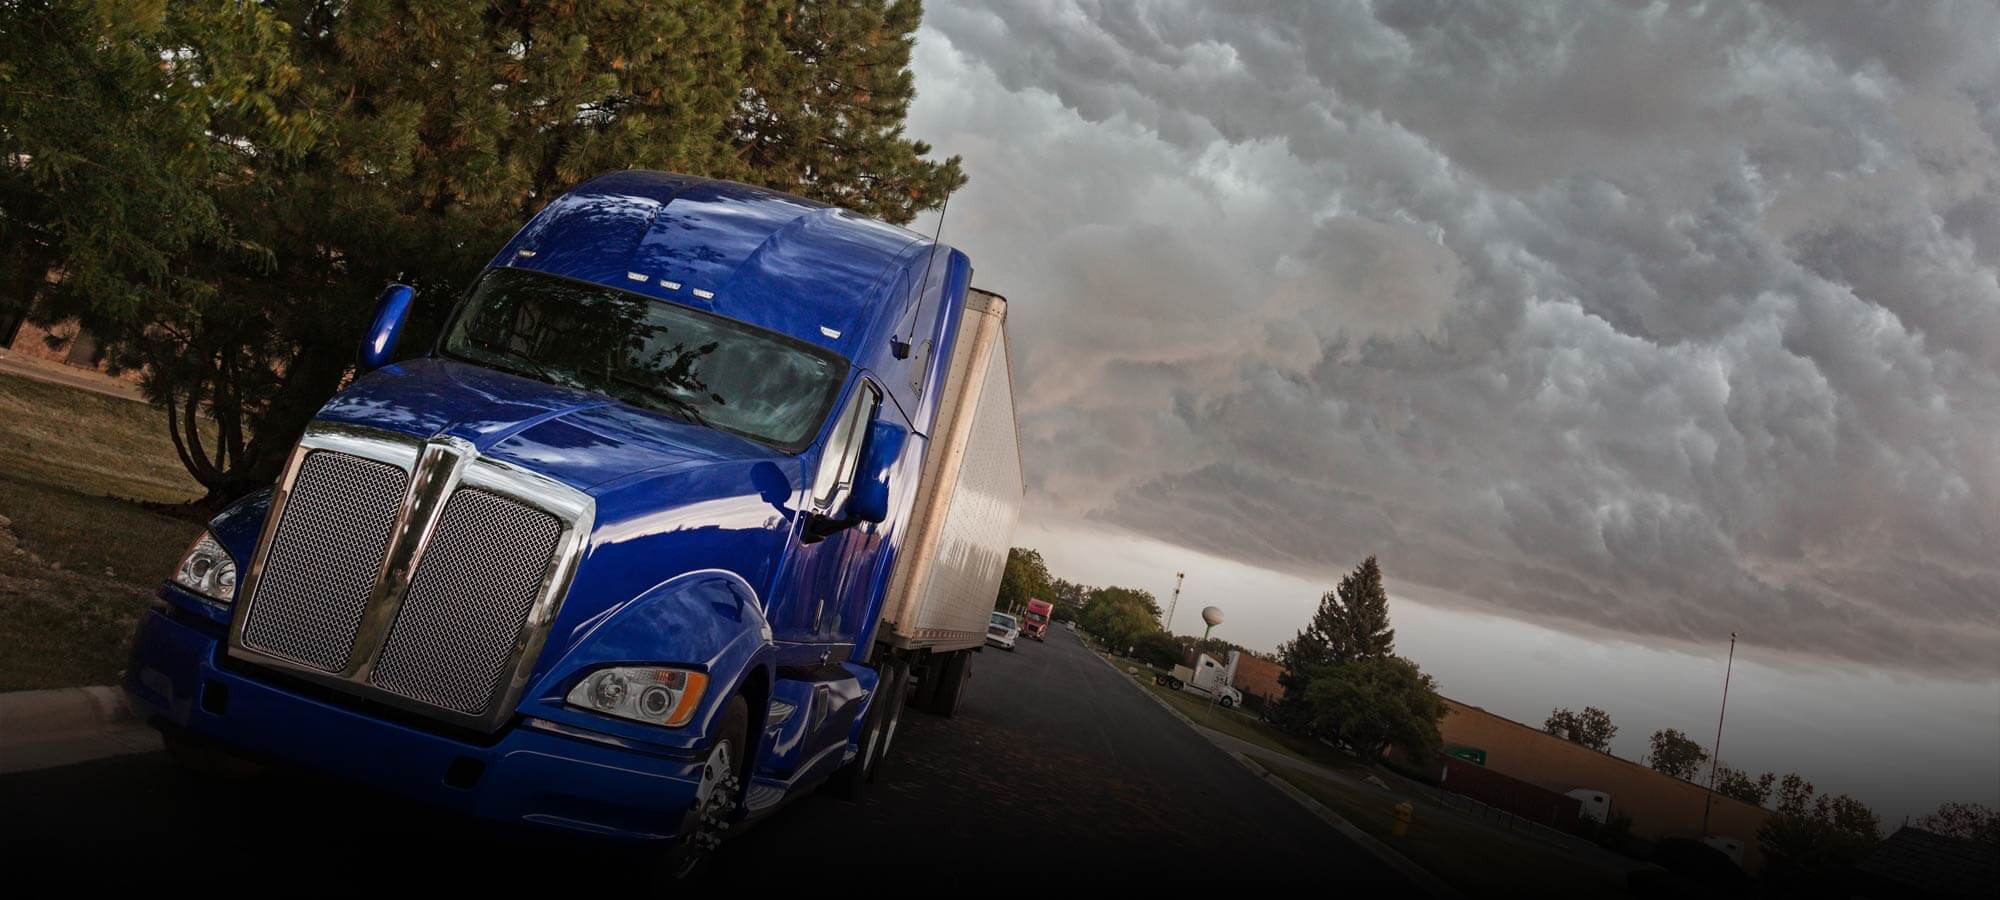 Tilted photo of a royal blue semi tractor and dry van parked along the side of the street with storm clouds building in the background